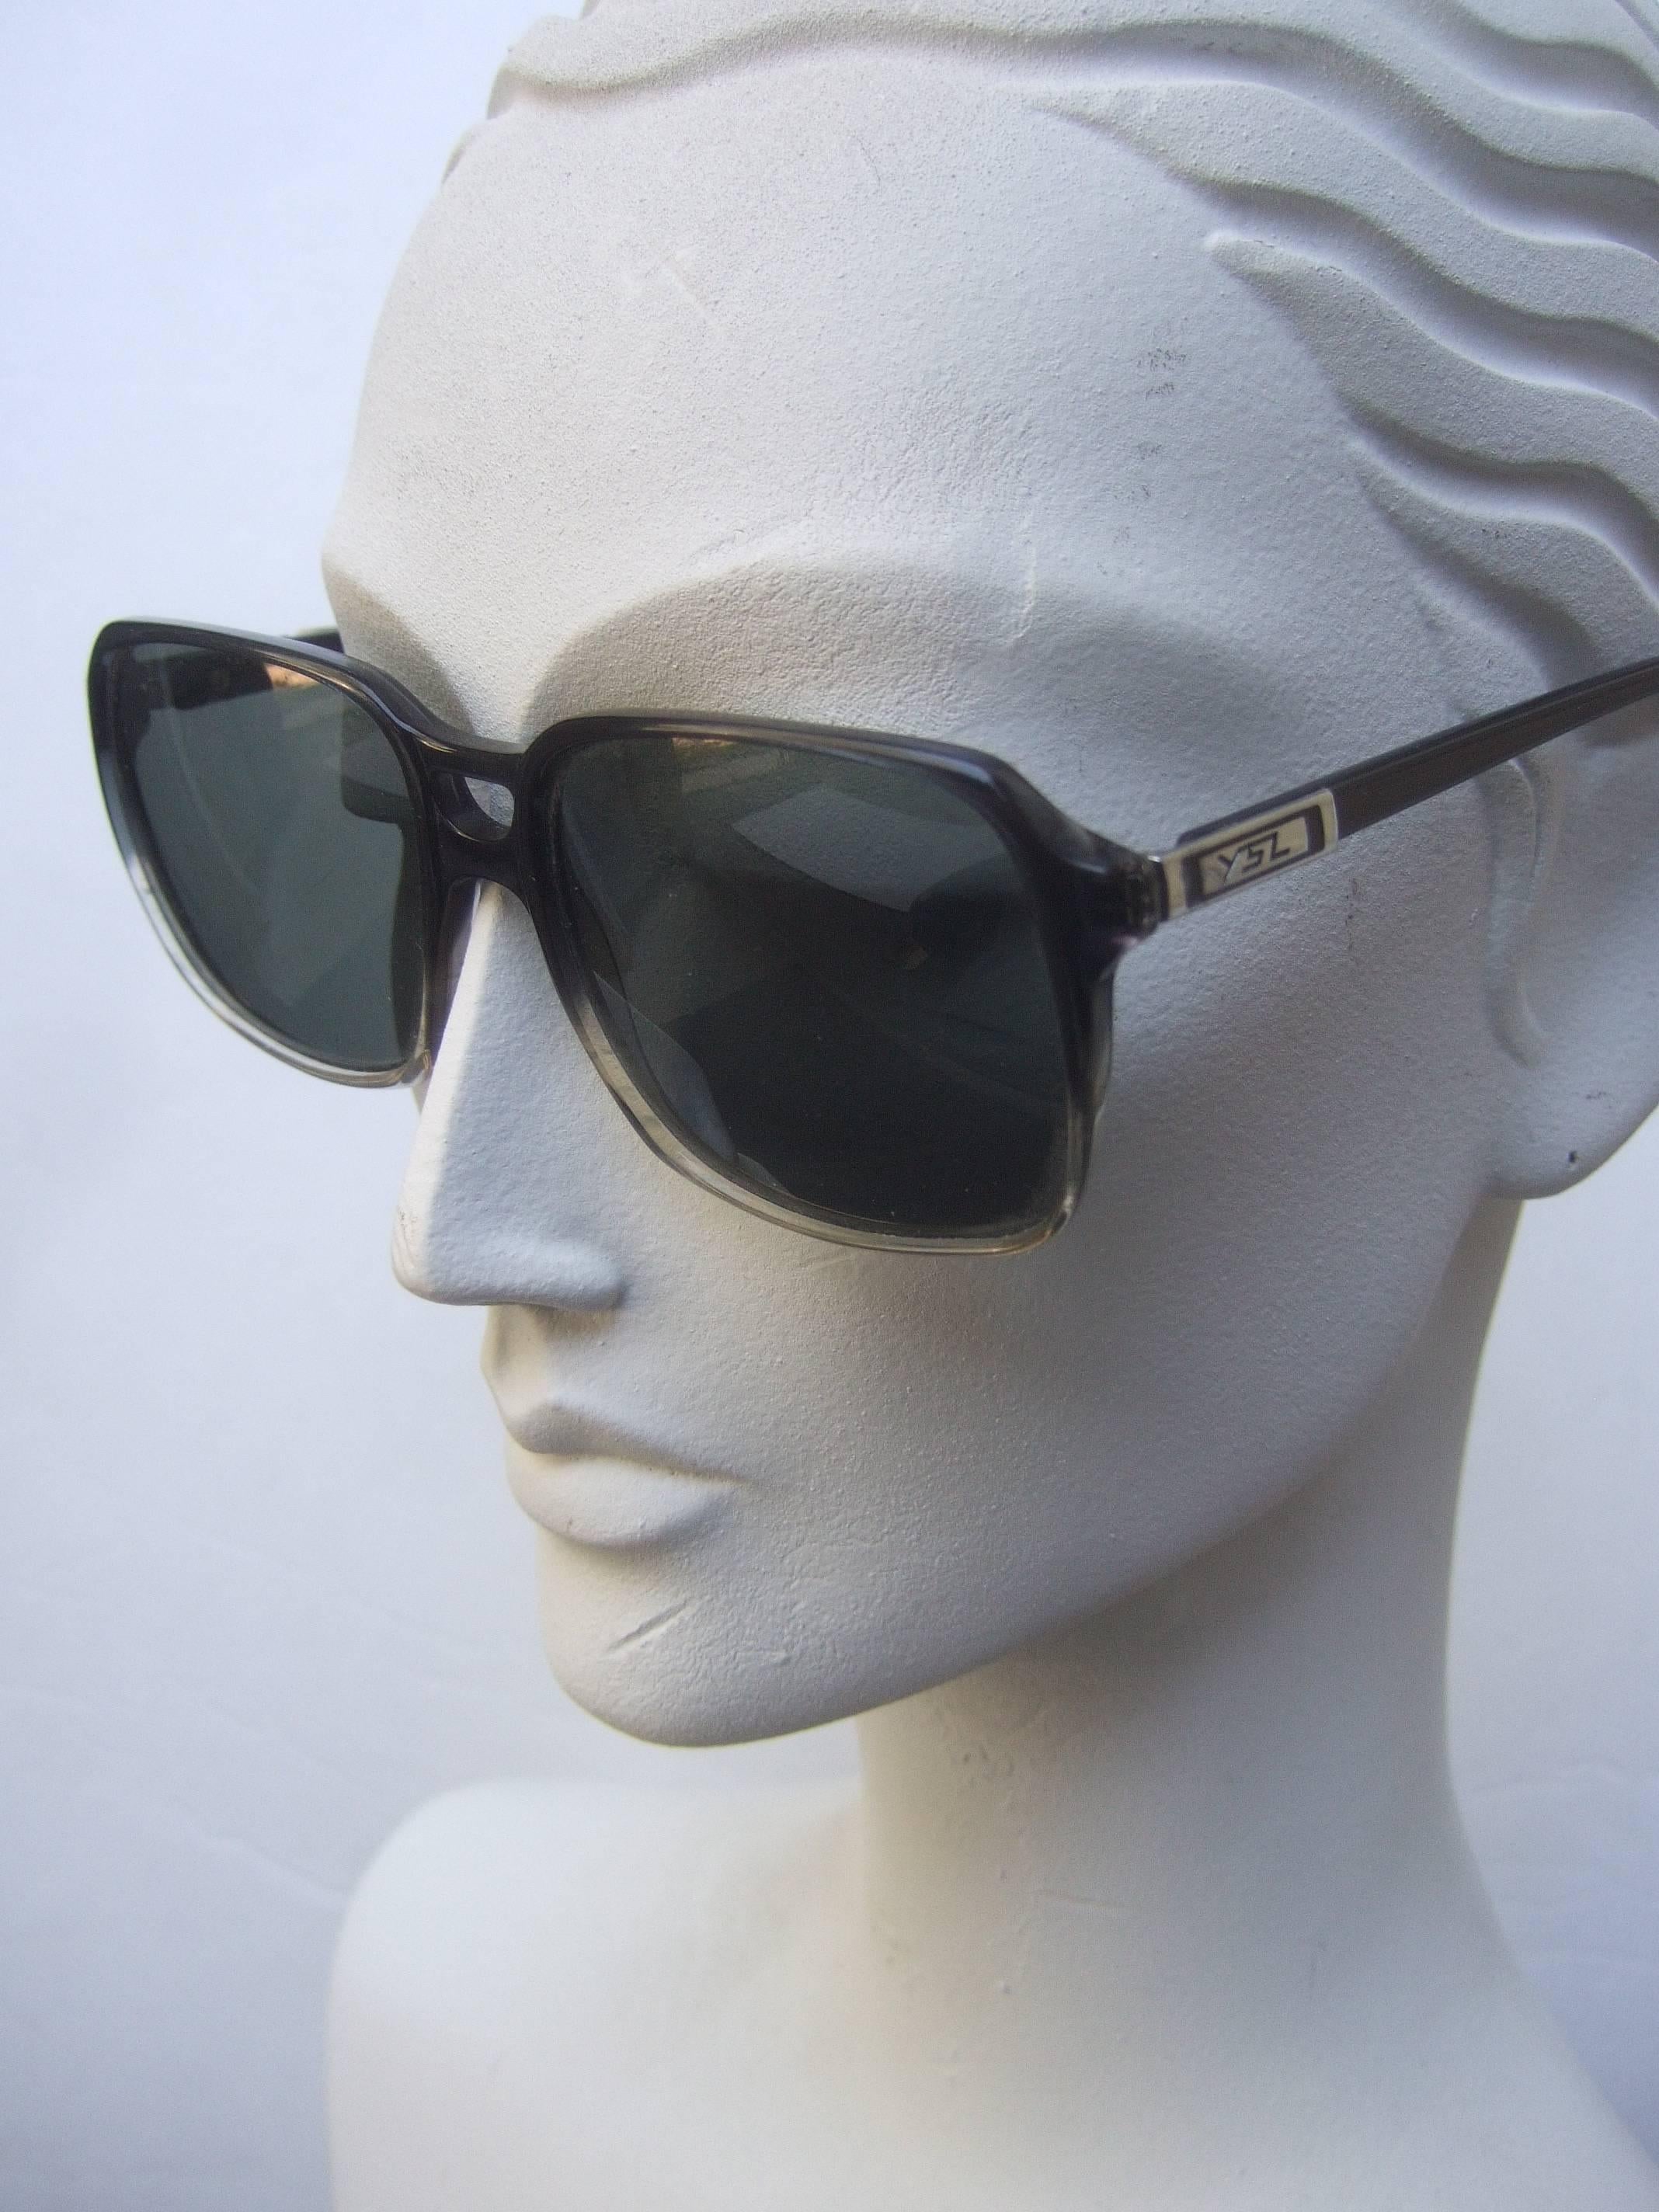 Yves Saint Laurent Gray lucite women's sunglasses c 1980s
The sleek gray lucite frames are paired with smoke
gray plastic lenses

The sides are adorned with chrome metal plates
inscribed with YSL initials on both sides

The interior arm of